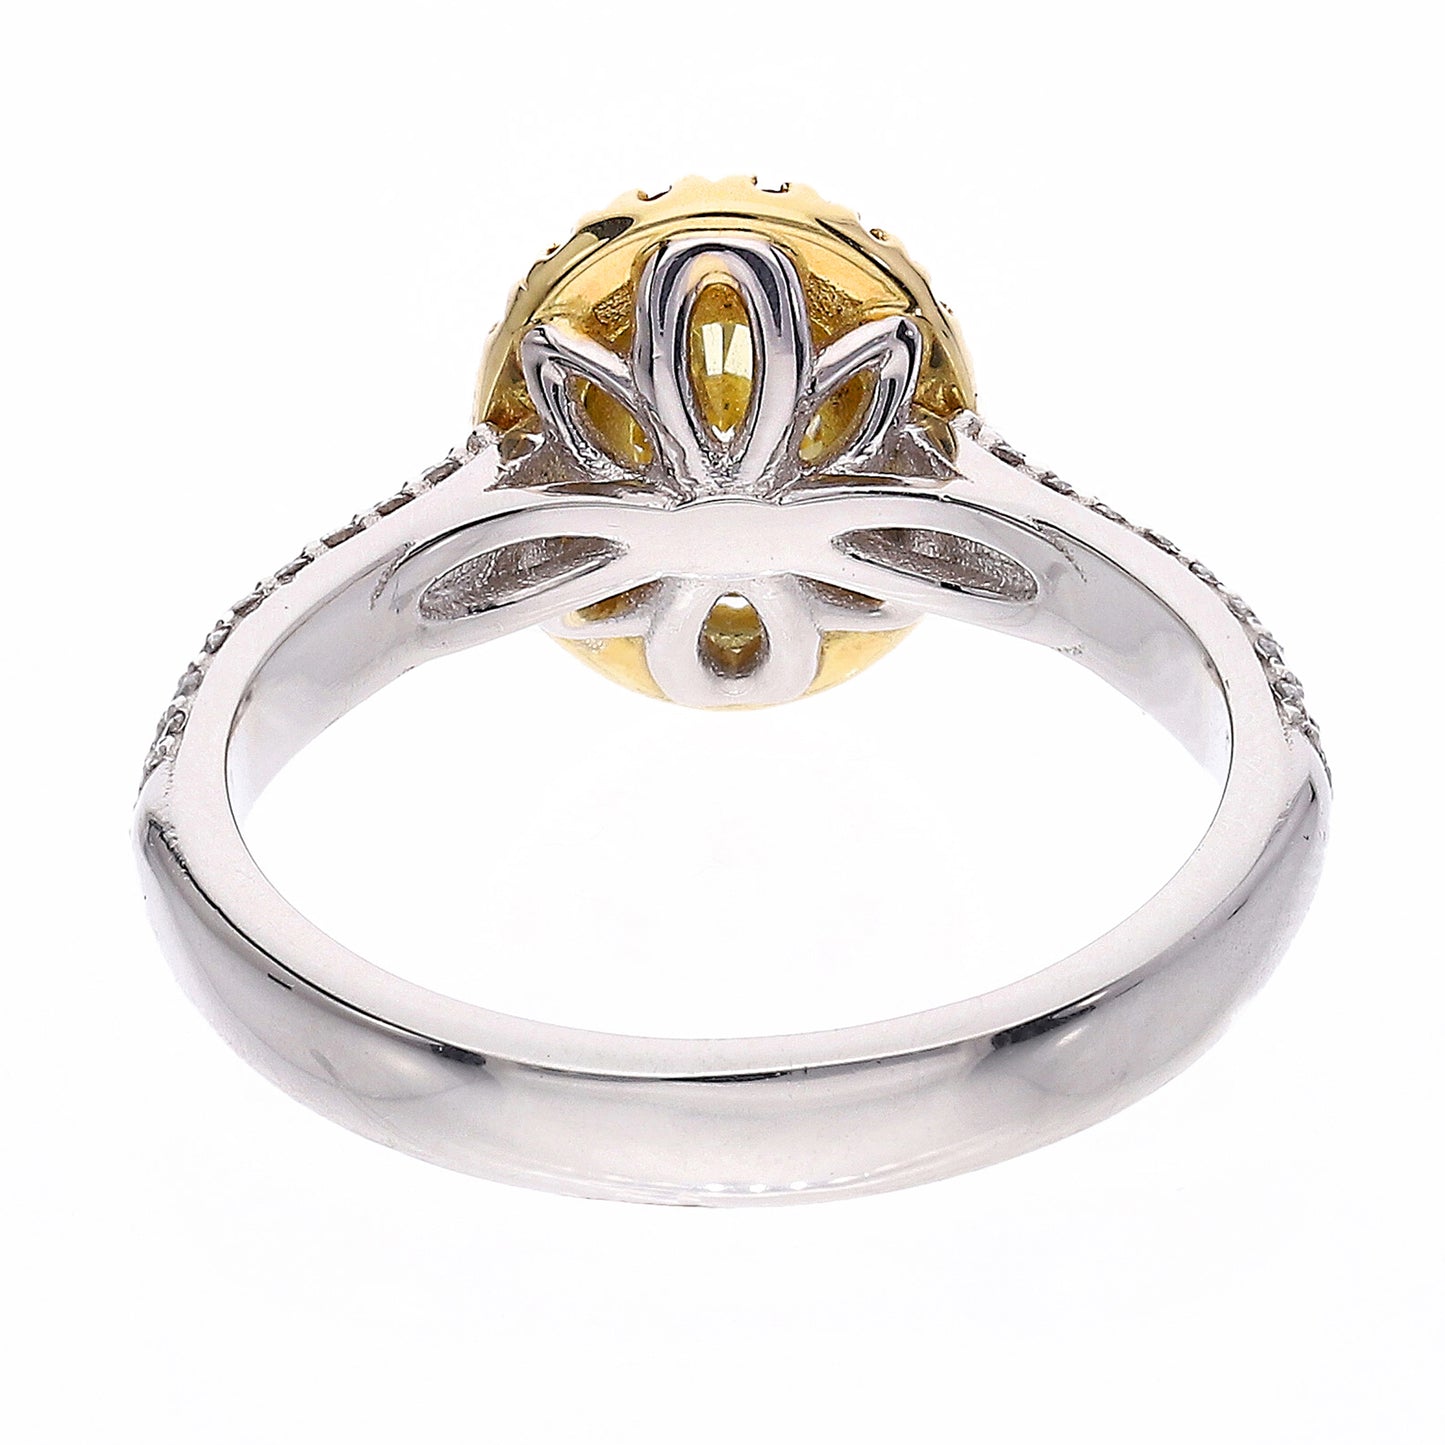 Fancy Yellow Diamond Oval Halo Ring in 18ct Yellow Gold and Platinum